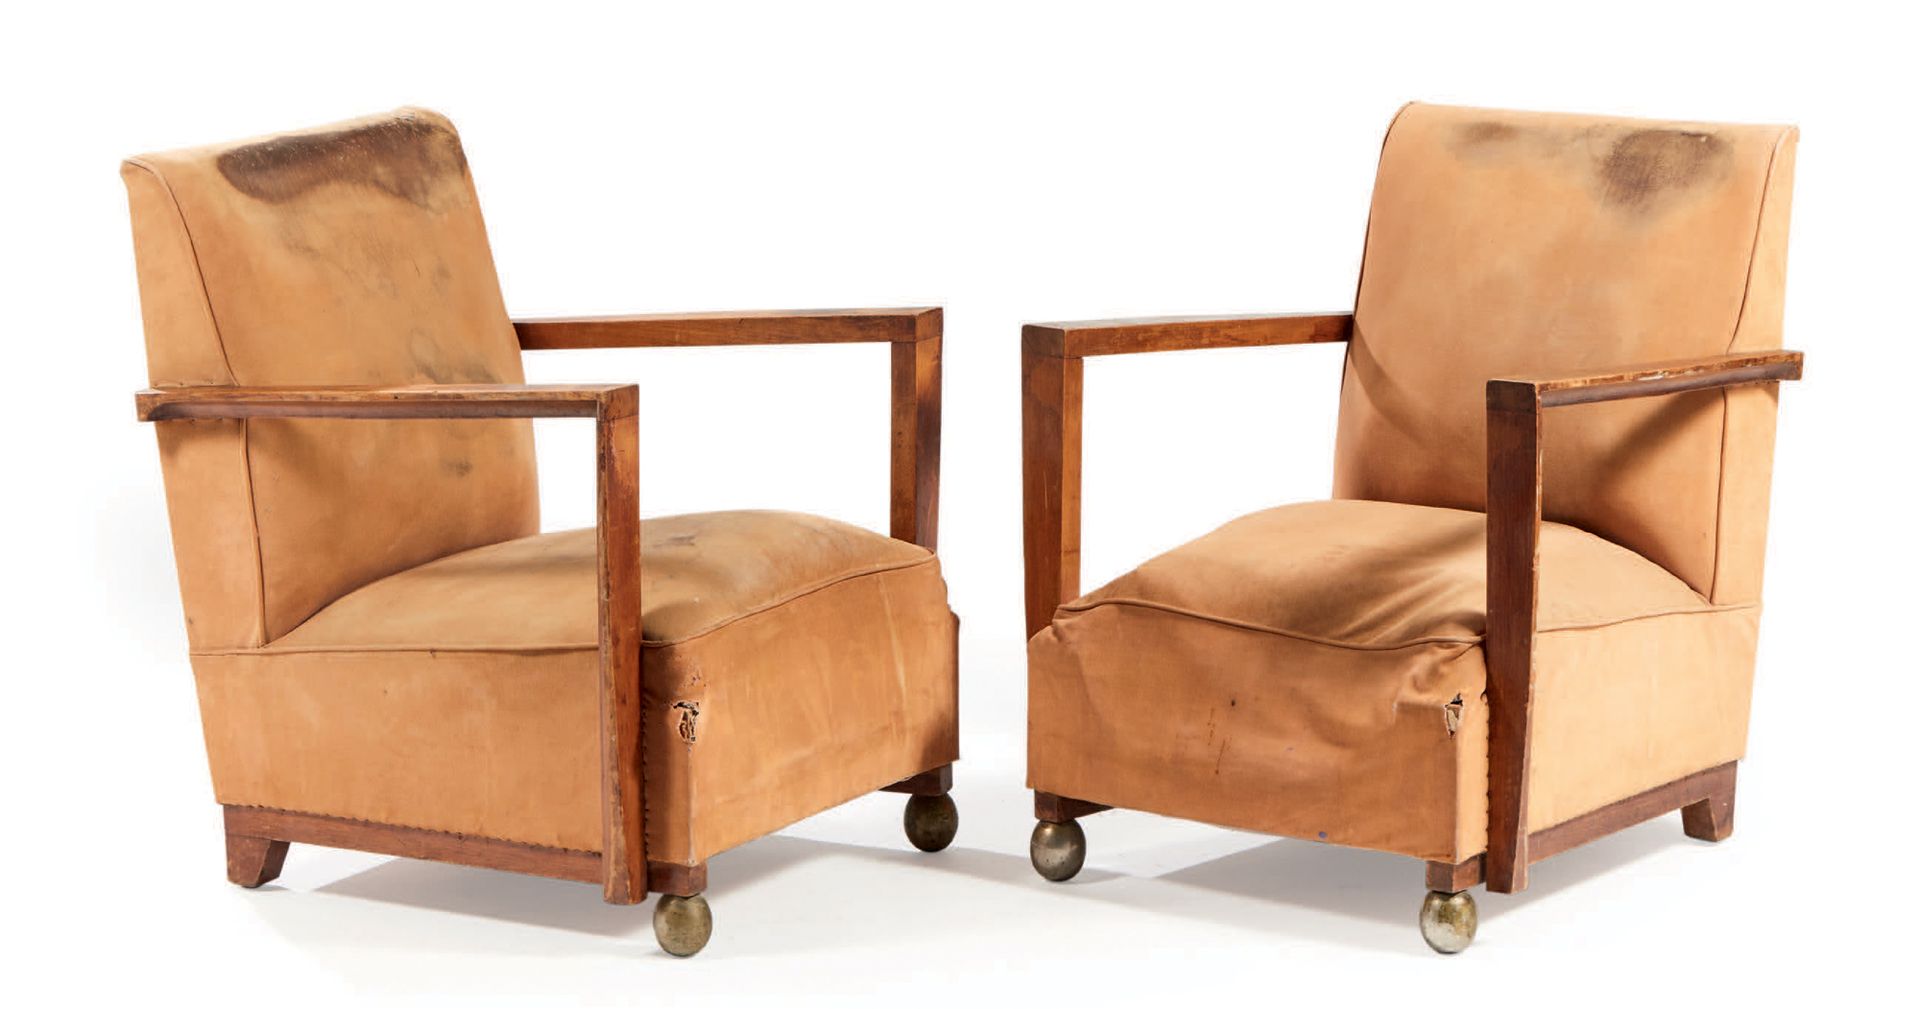 TRAVAIL FRANÇAIS 1930 
Pair of modernist walnut armchairs with detached arms, si&hellip;